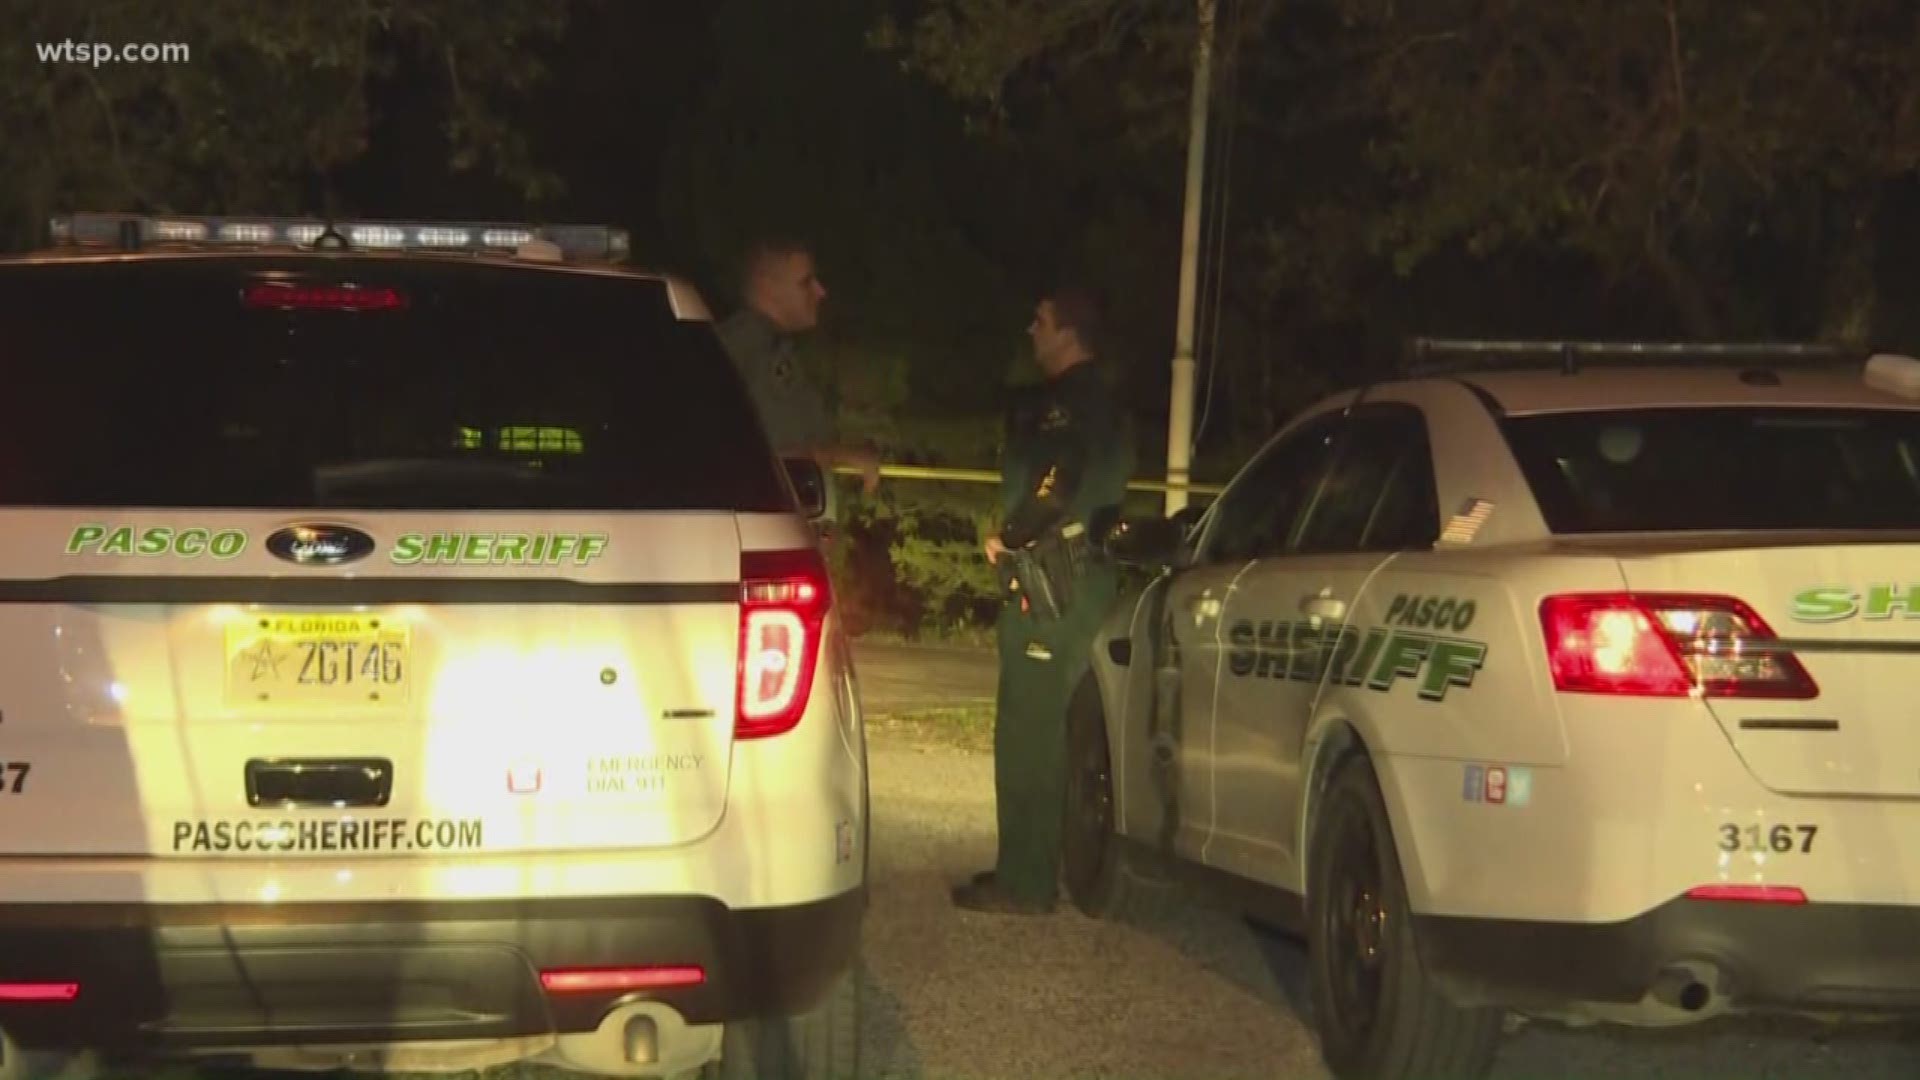 An elderly Hudson man was injured when he was attacked by a man who broke into his home and took his pickup truck, Pasco County deputies said Friday.

About 5:40 pm., deputies were called to the home on Duda Road where the victim was attacked by an armed masked man in his 20s, law enforcement said.